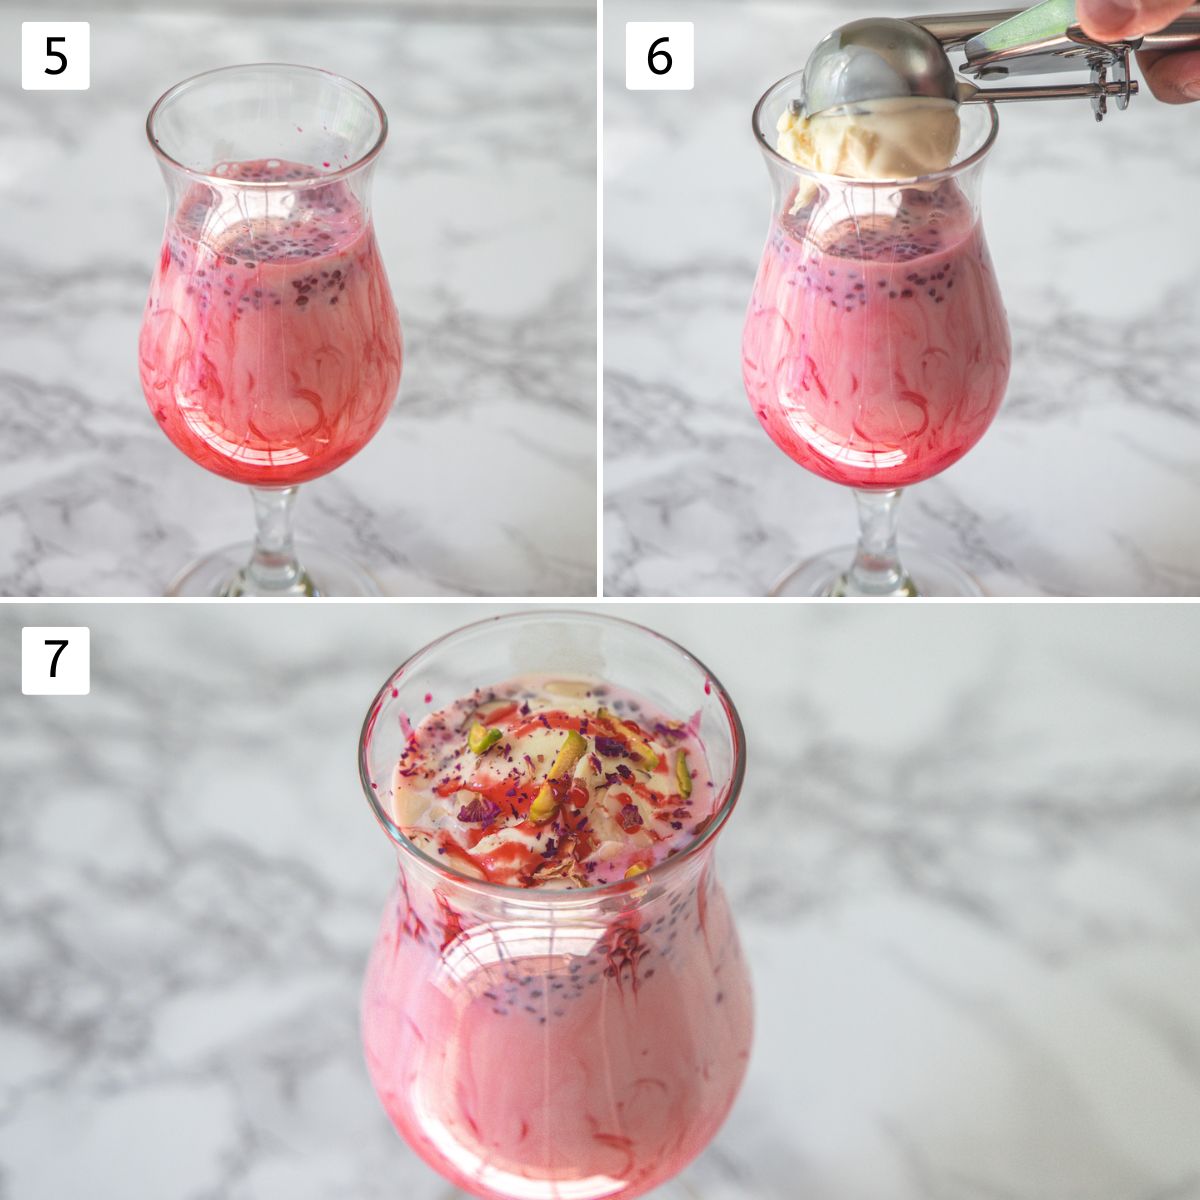 Collage of 3 images showing adding milk, scoop of ice cream and garnishing with nuts and more syrup.